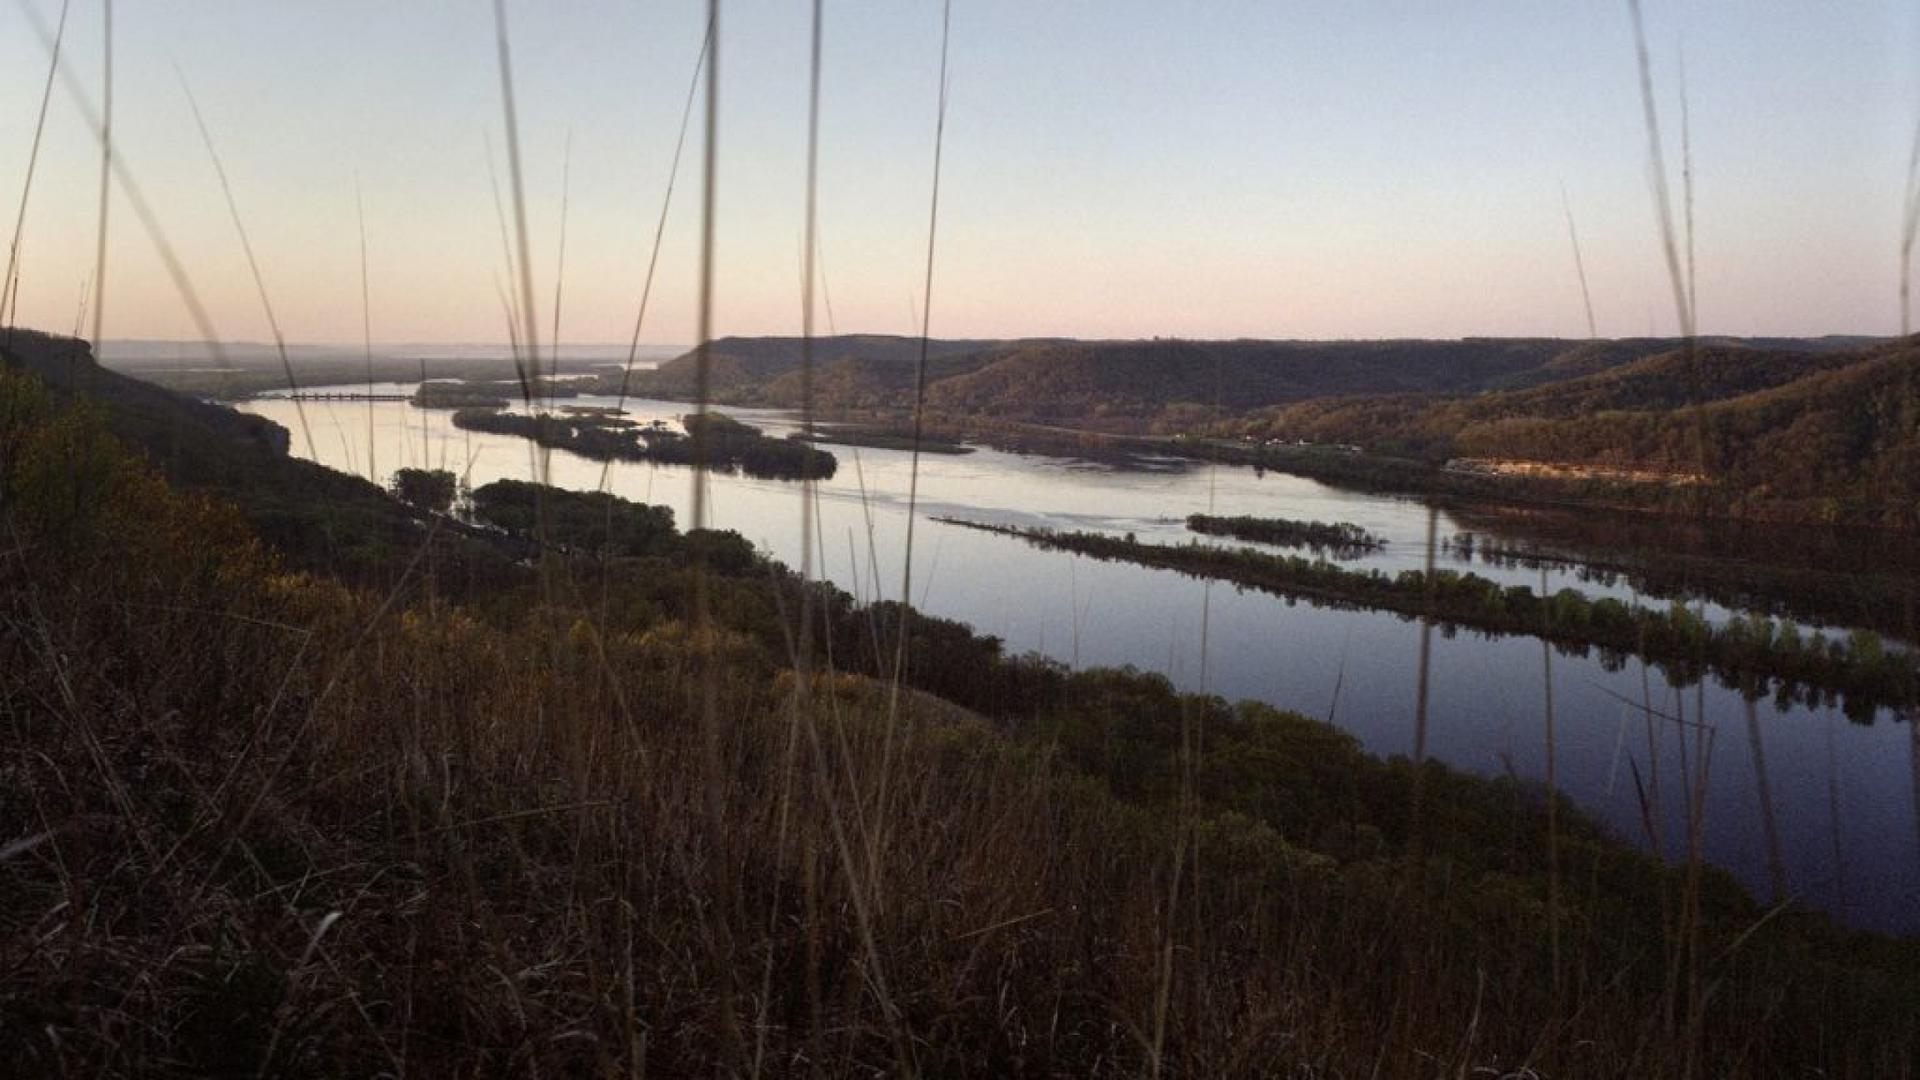 The Mississippi River is shown in the distance flowing through landscape of trees and grass.